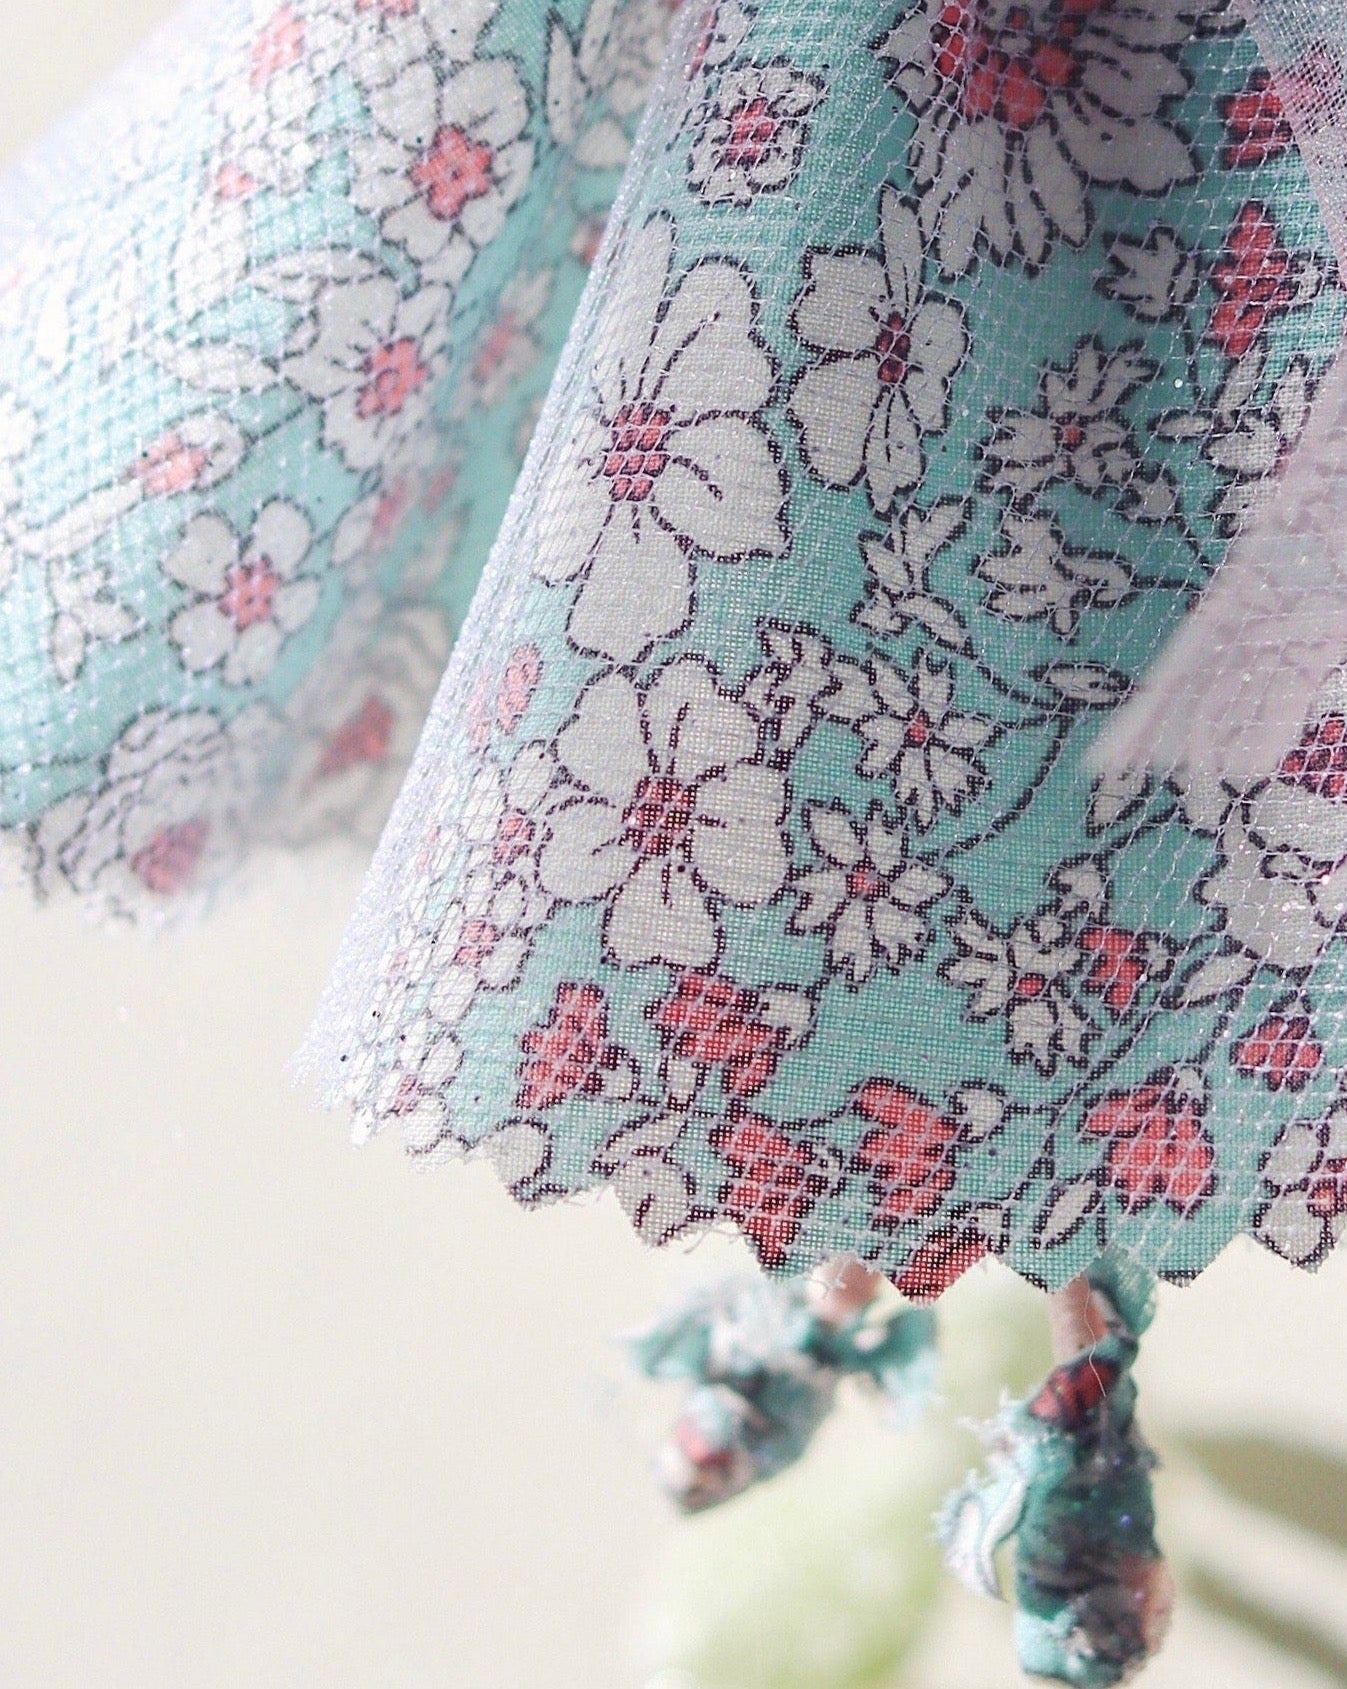 upclose of liberty flower fairy dress decoration. handmade gift. pink and blue floral